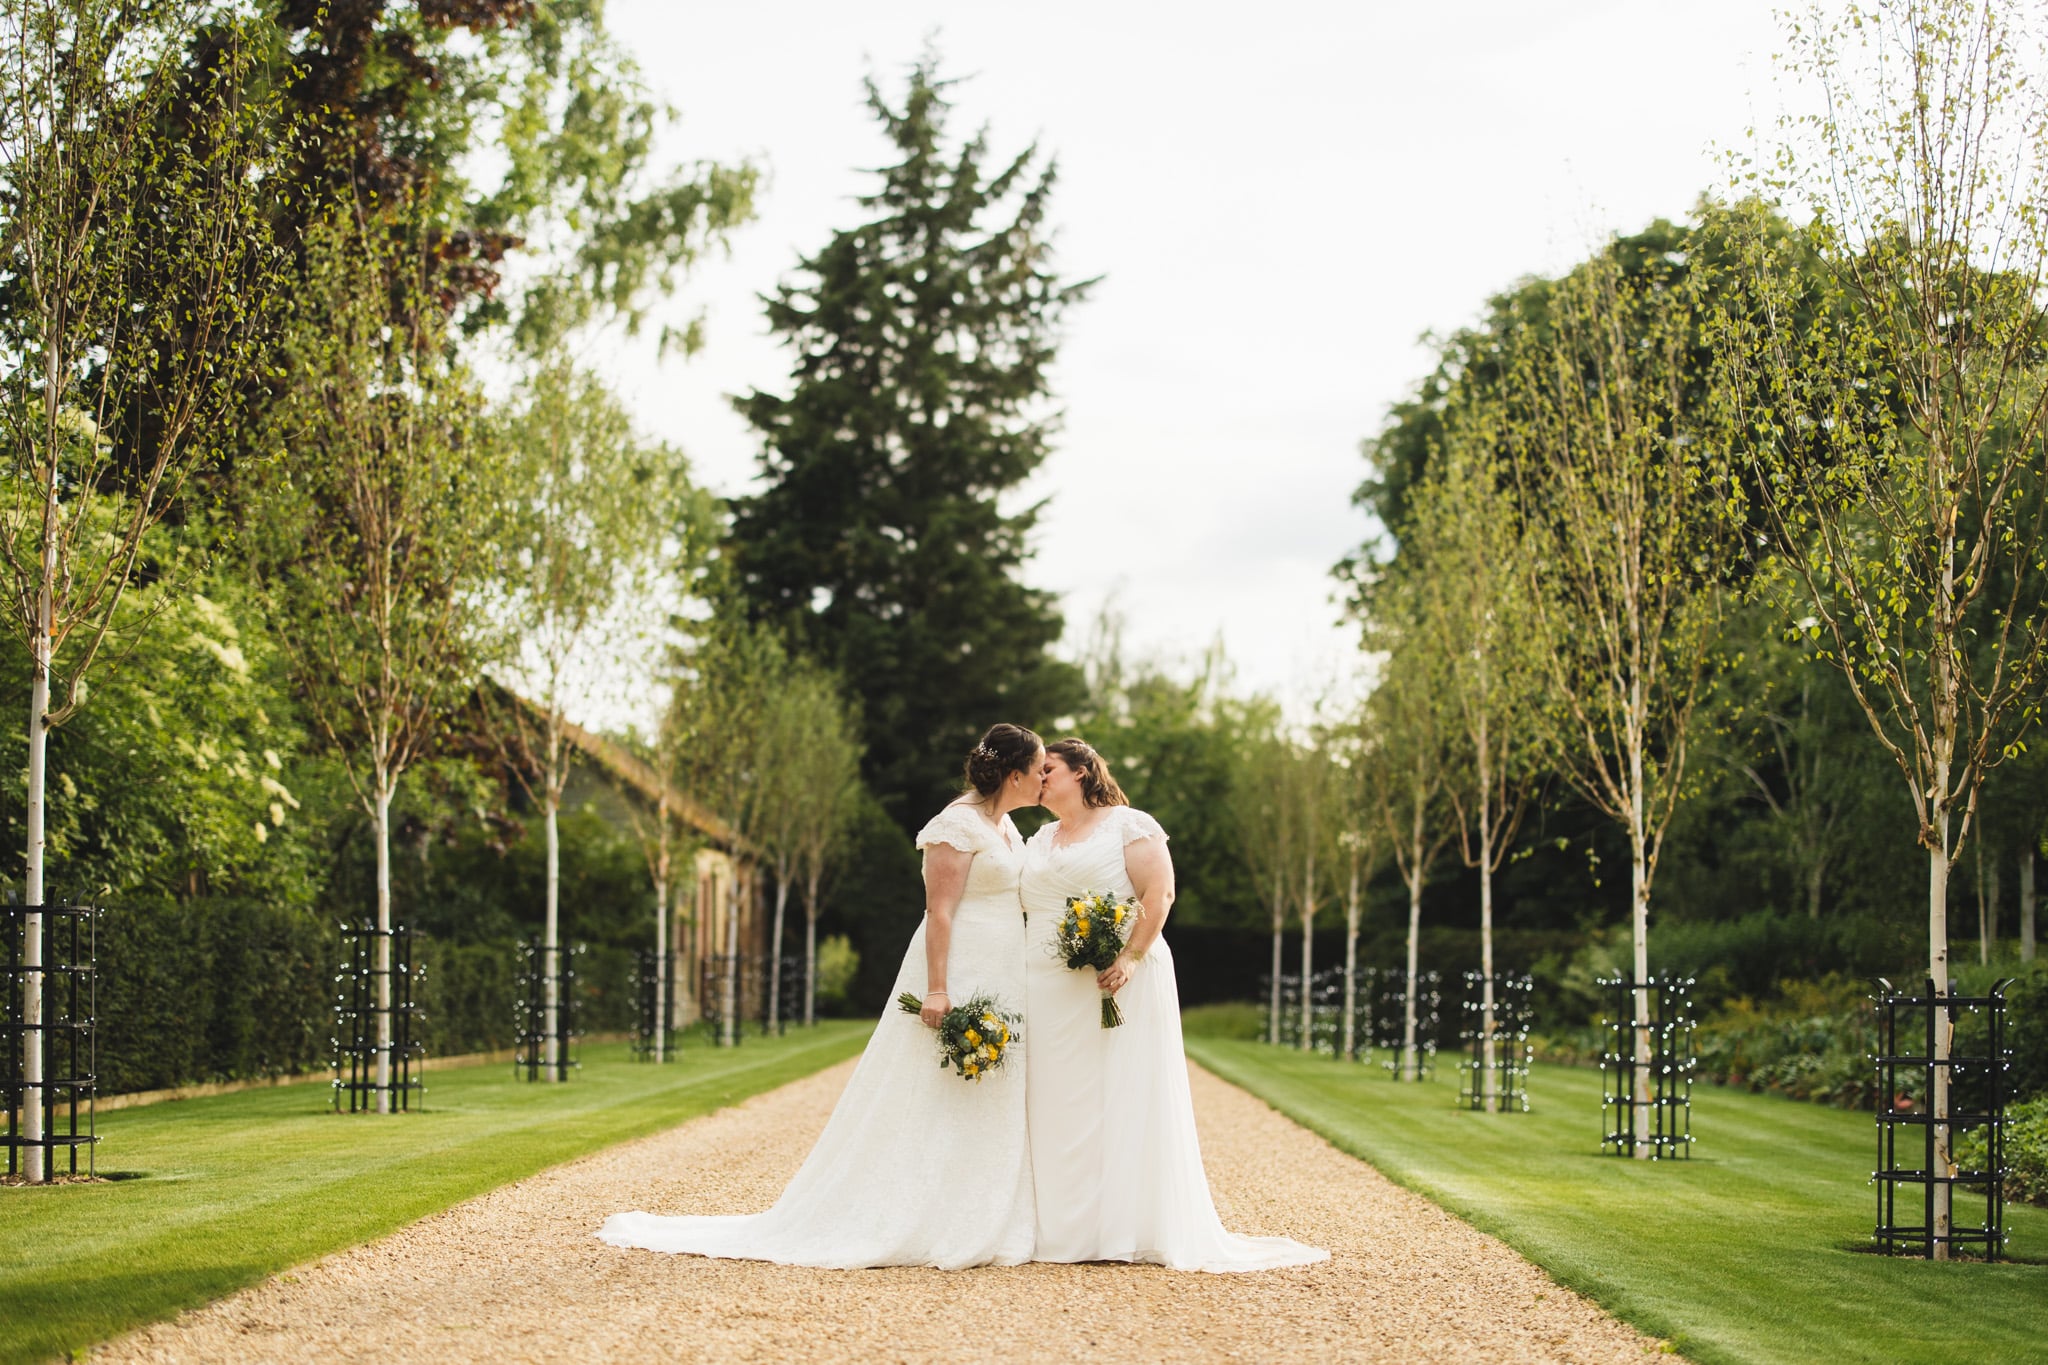 Two brides same sex wedding share kiss at tree lined driveway of countryside wedding venue